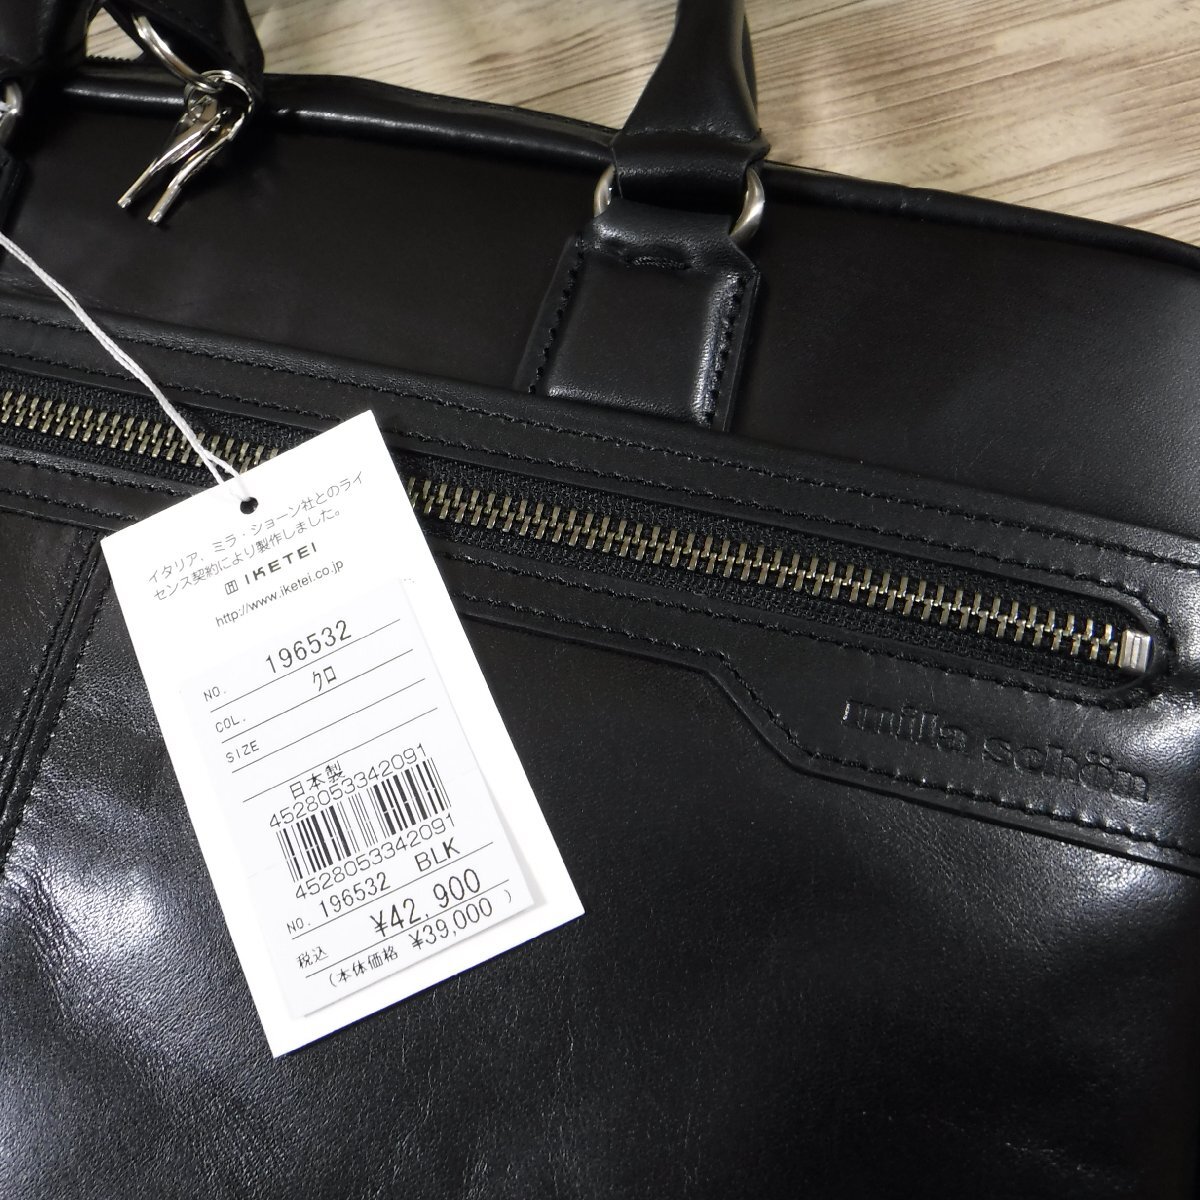 BB646 Mila Schon regular price 42900 jpy new goods black leather business bag key attaching made in Japan A4 arte 196532 black briefcase mila schon